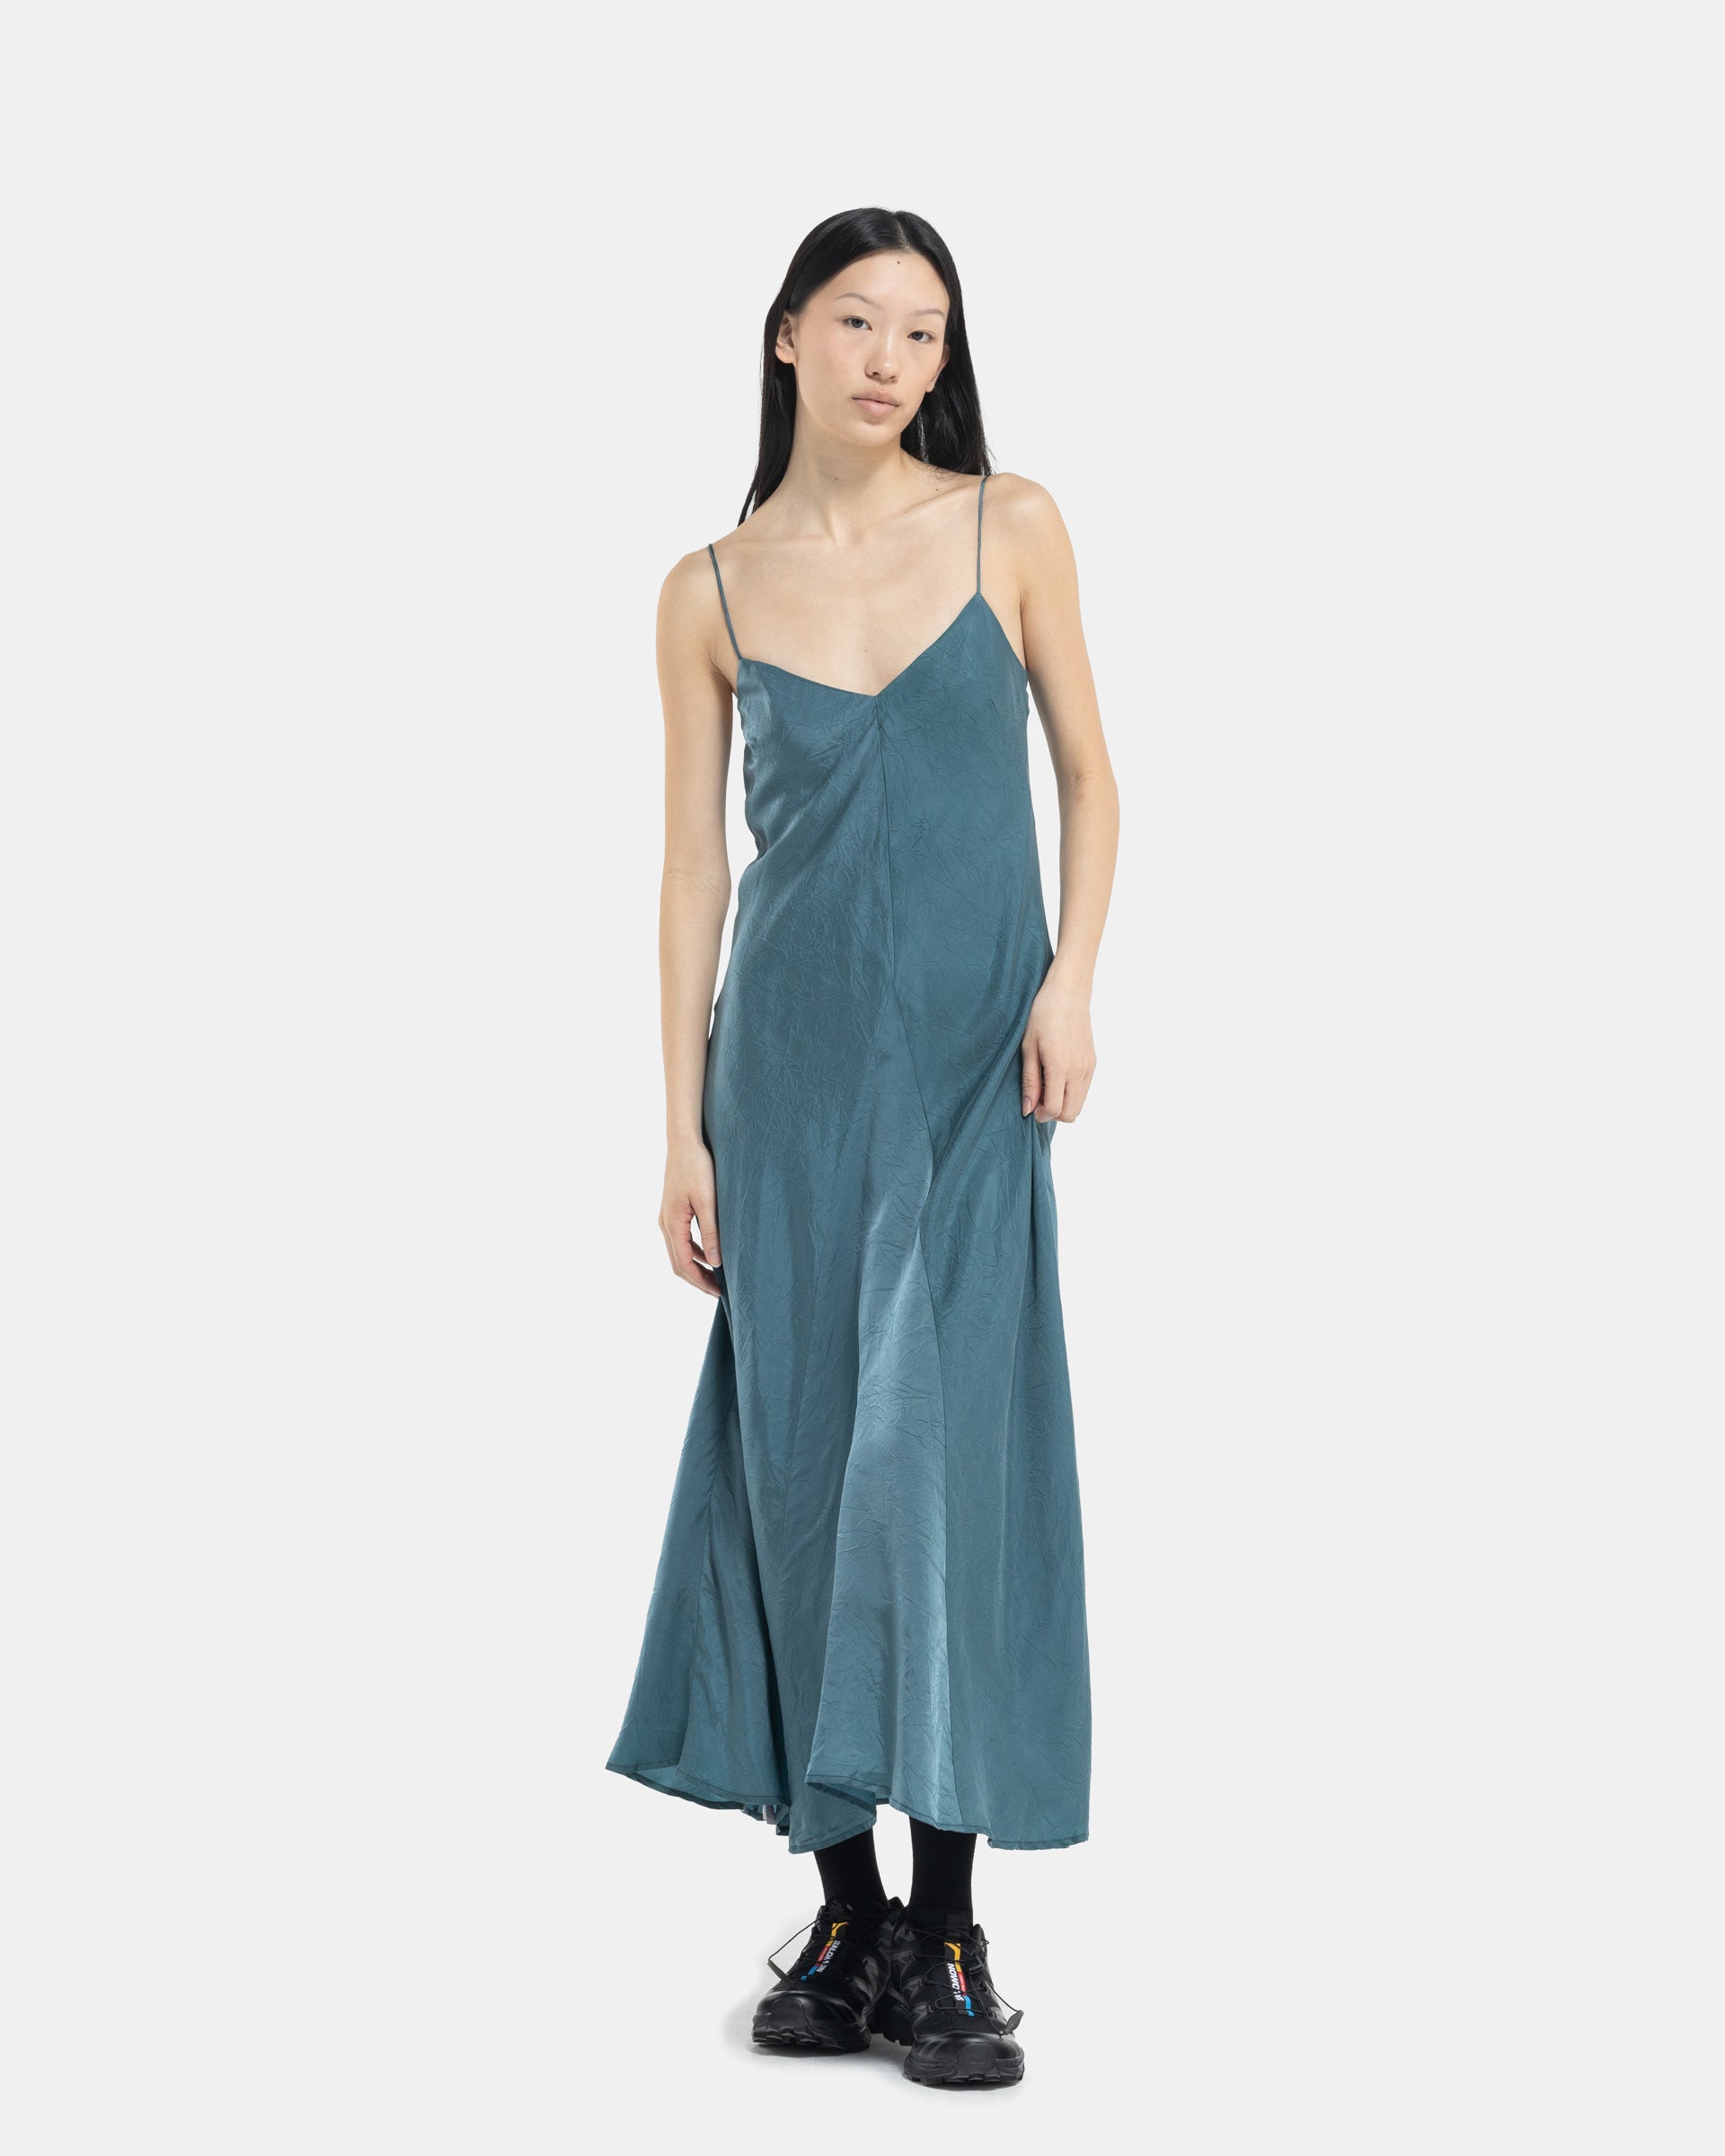 Model wearing blue bias slip dress from Song For The Mute on white background